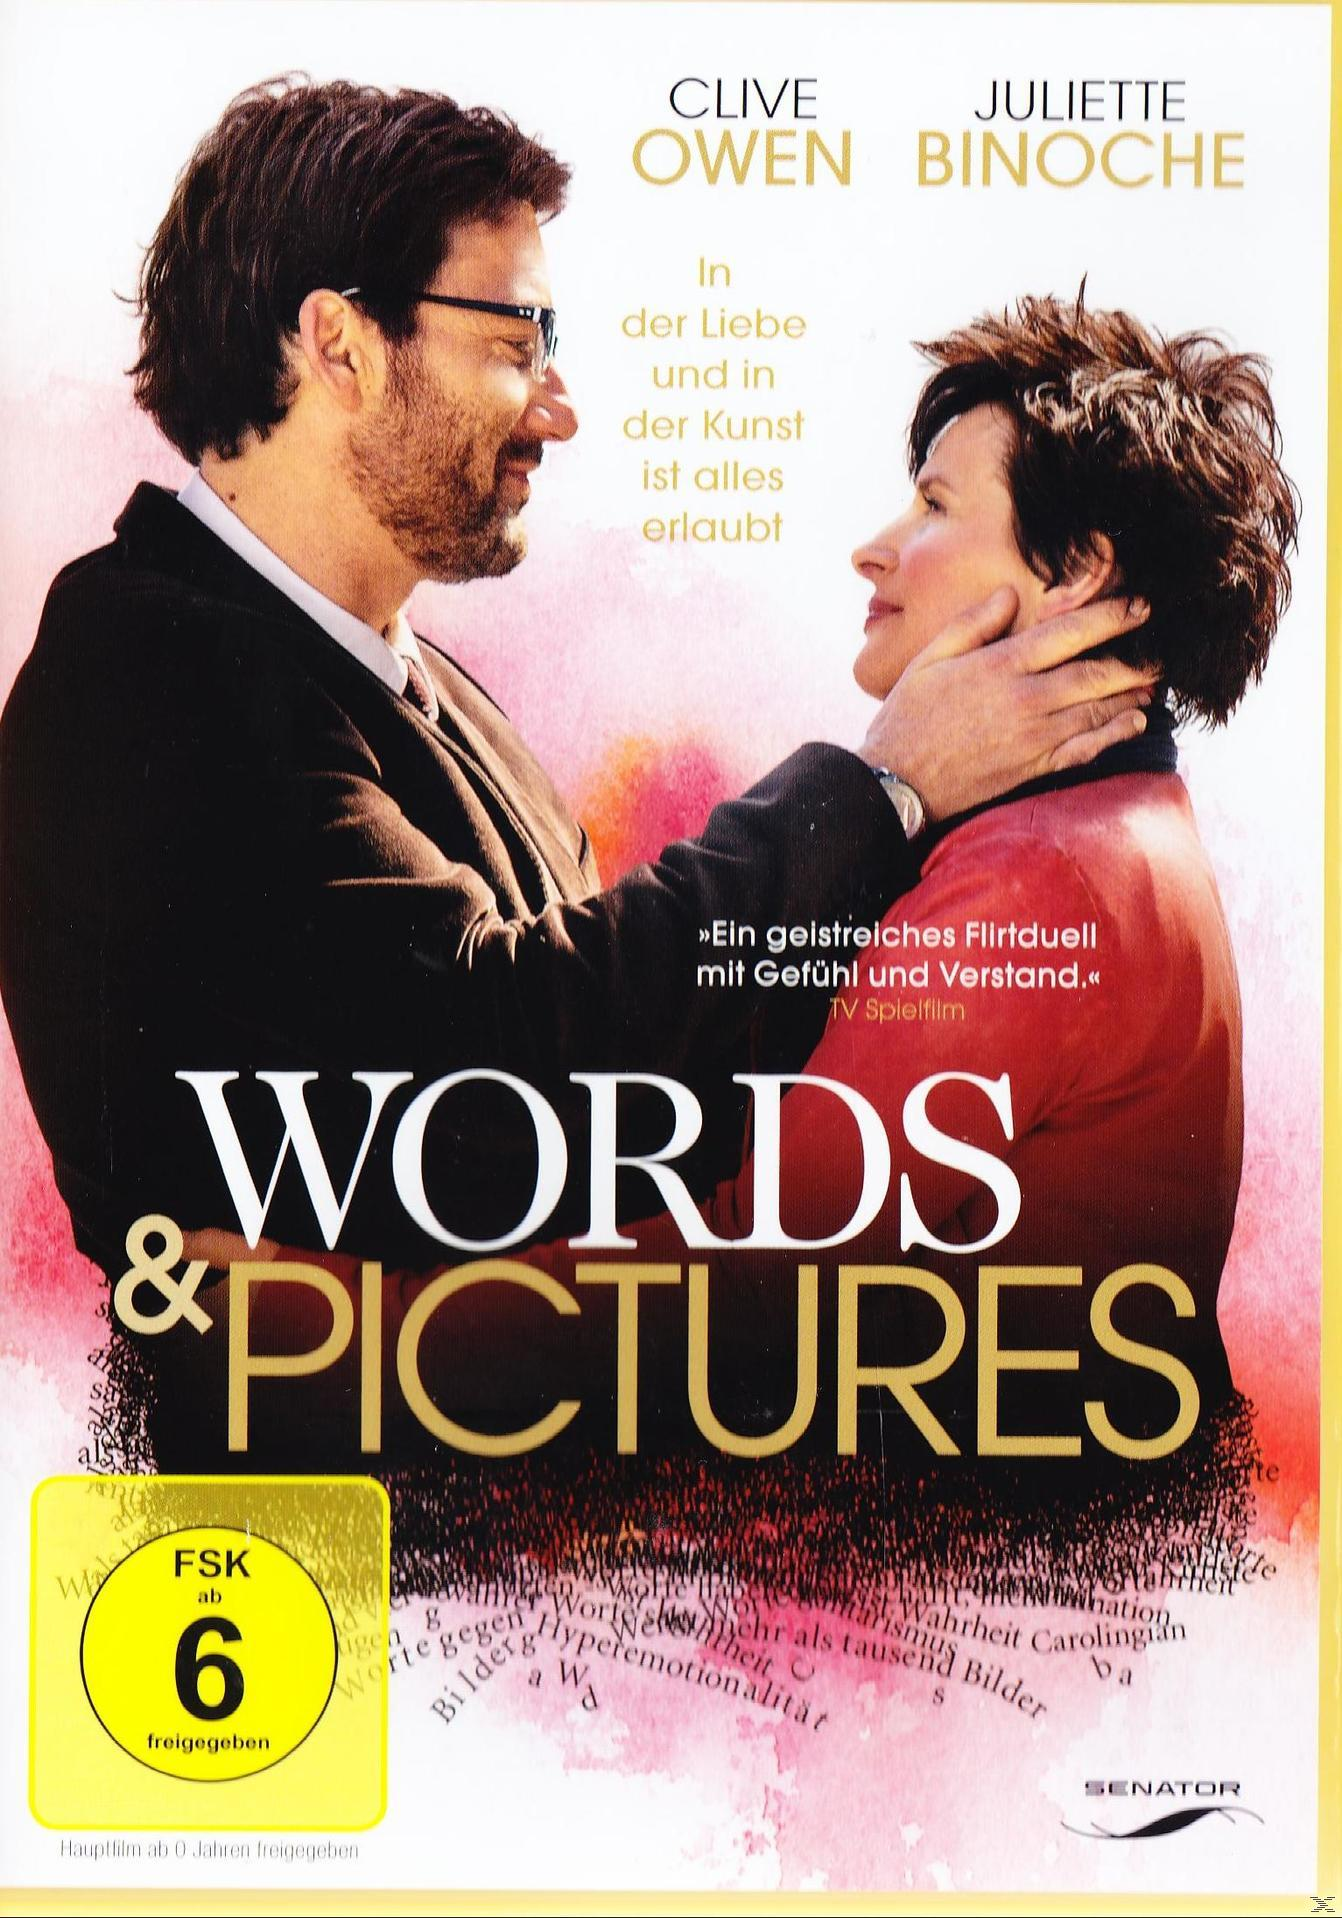 DVD and Words Pictures Liebe) (Alles